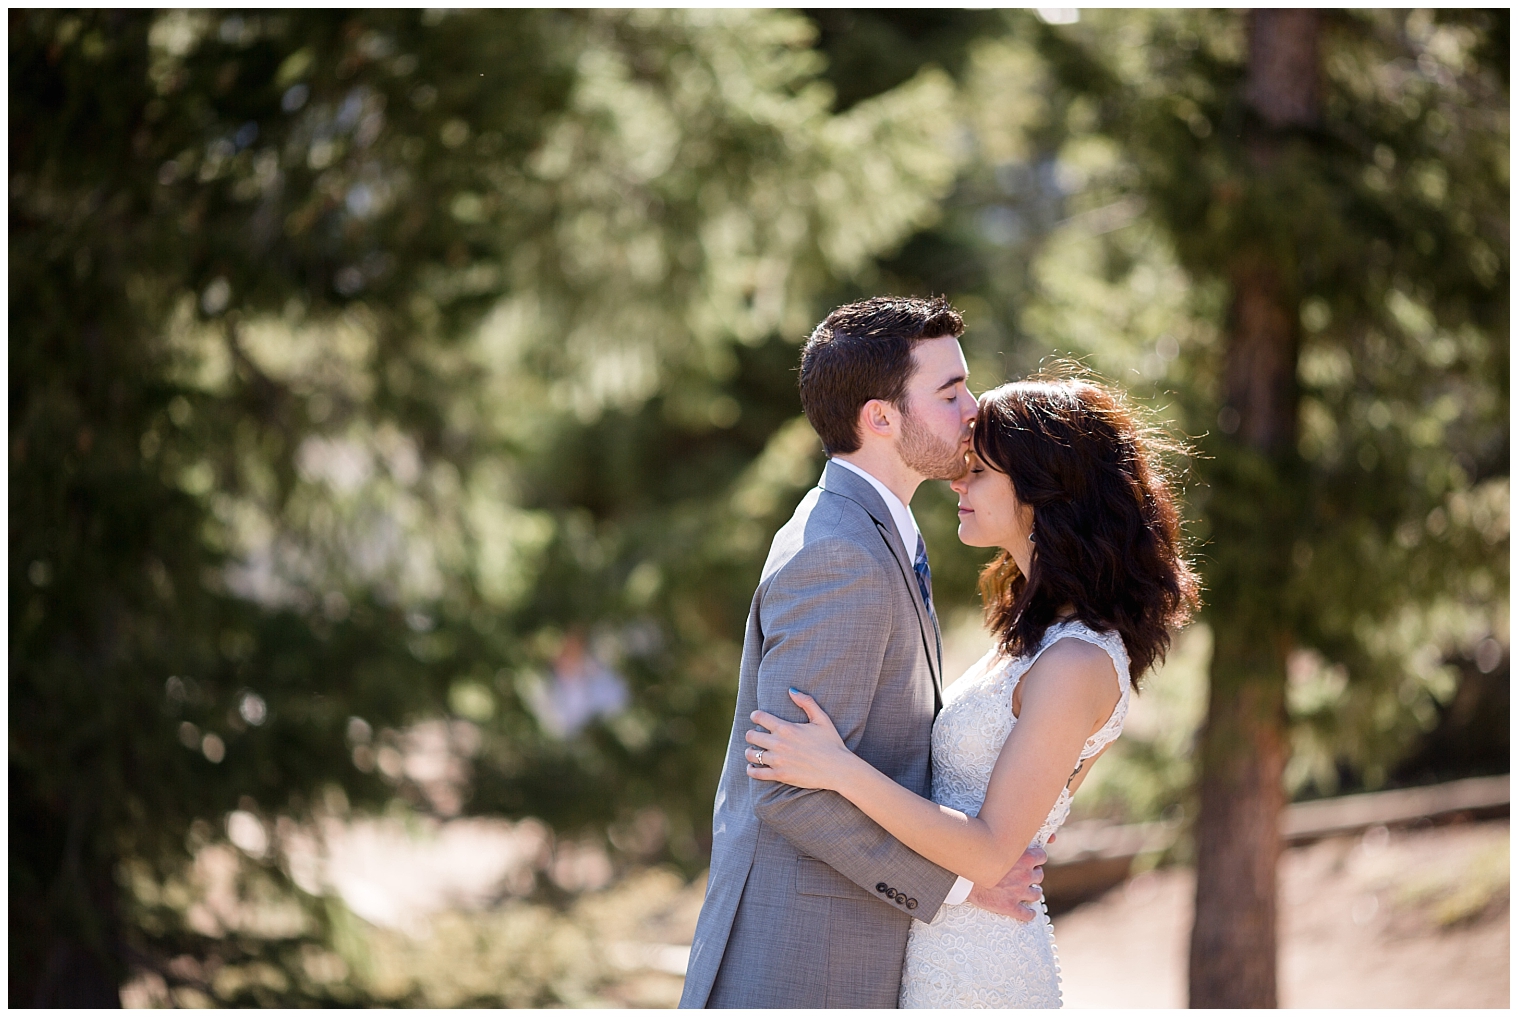 During their Colorado mountain wedding day, the groom kisses his bride's forehead.